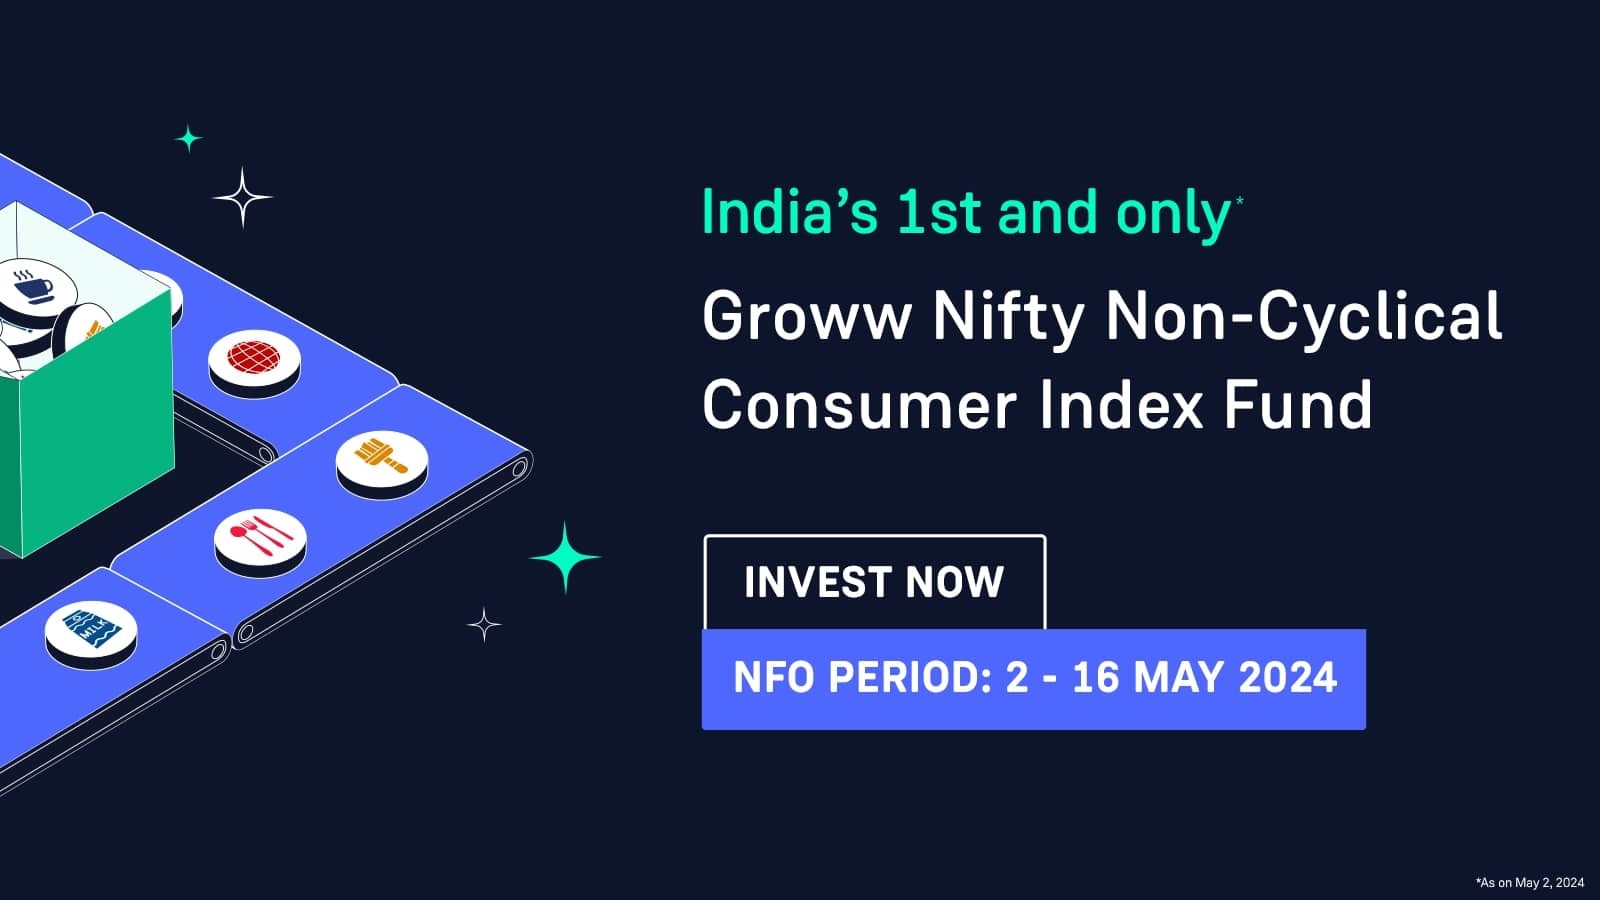 India's first Nifty Non-Cyclical Consumer Index Fund